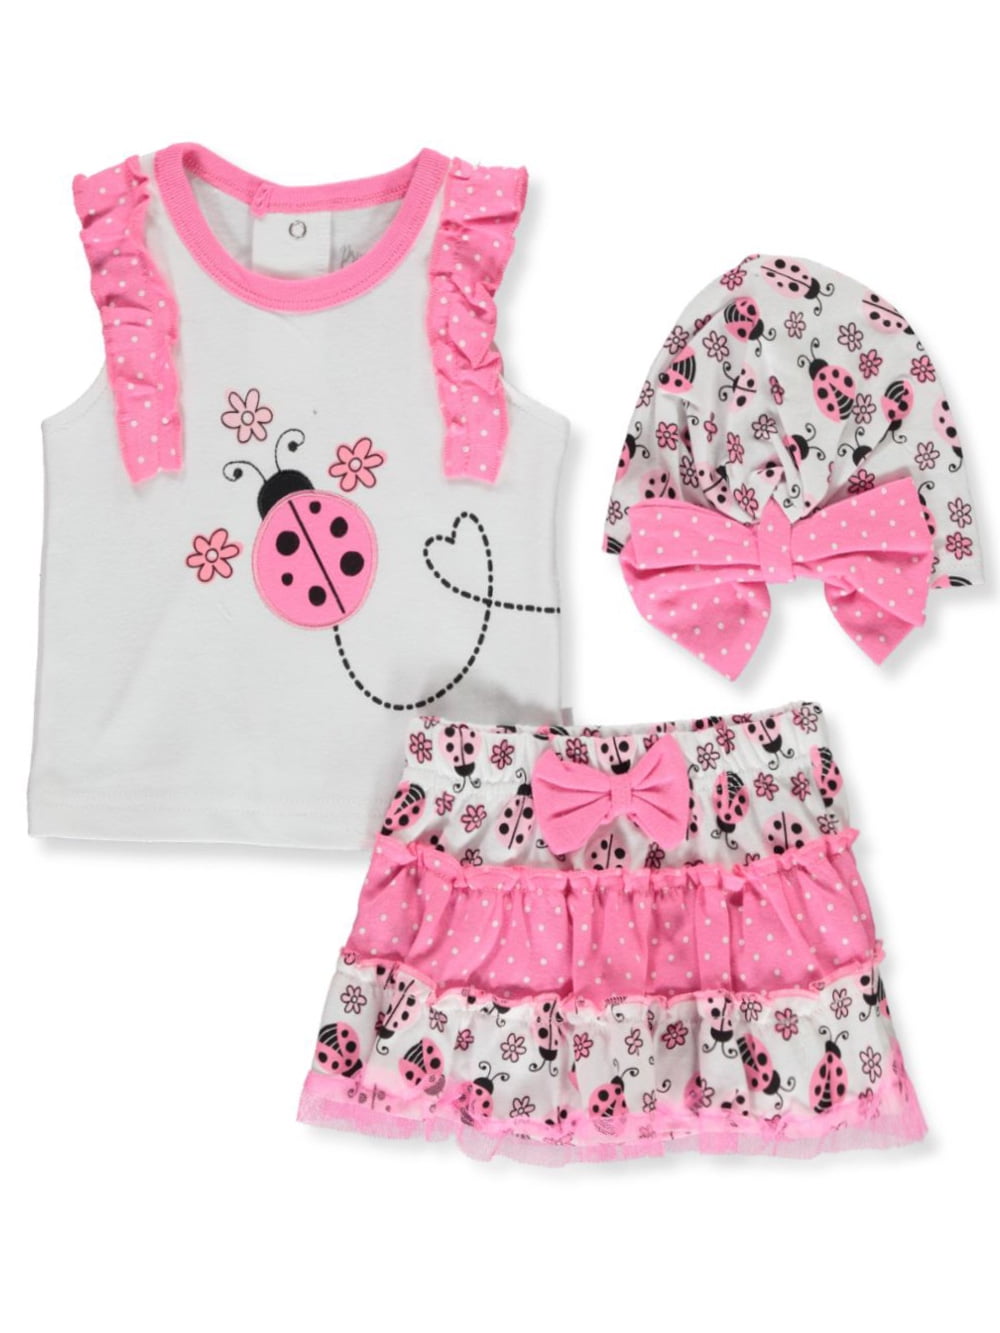 Girls Size 3M Adorable 2-Piece Summer Dress Outfit New Ladybug 